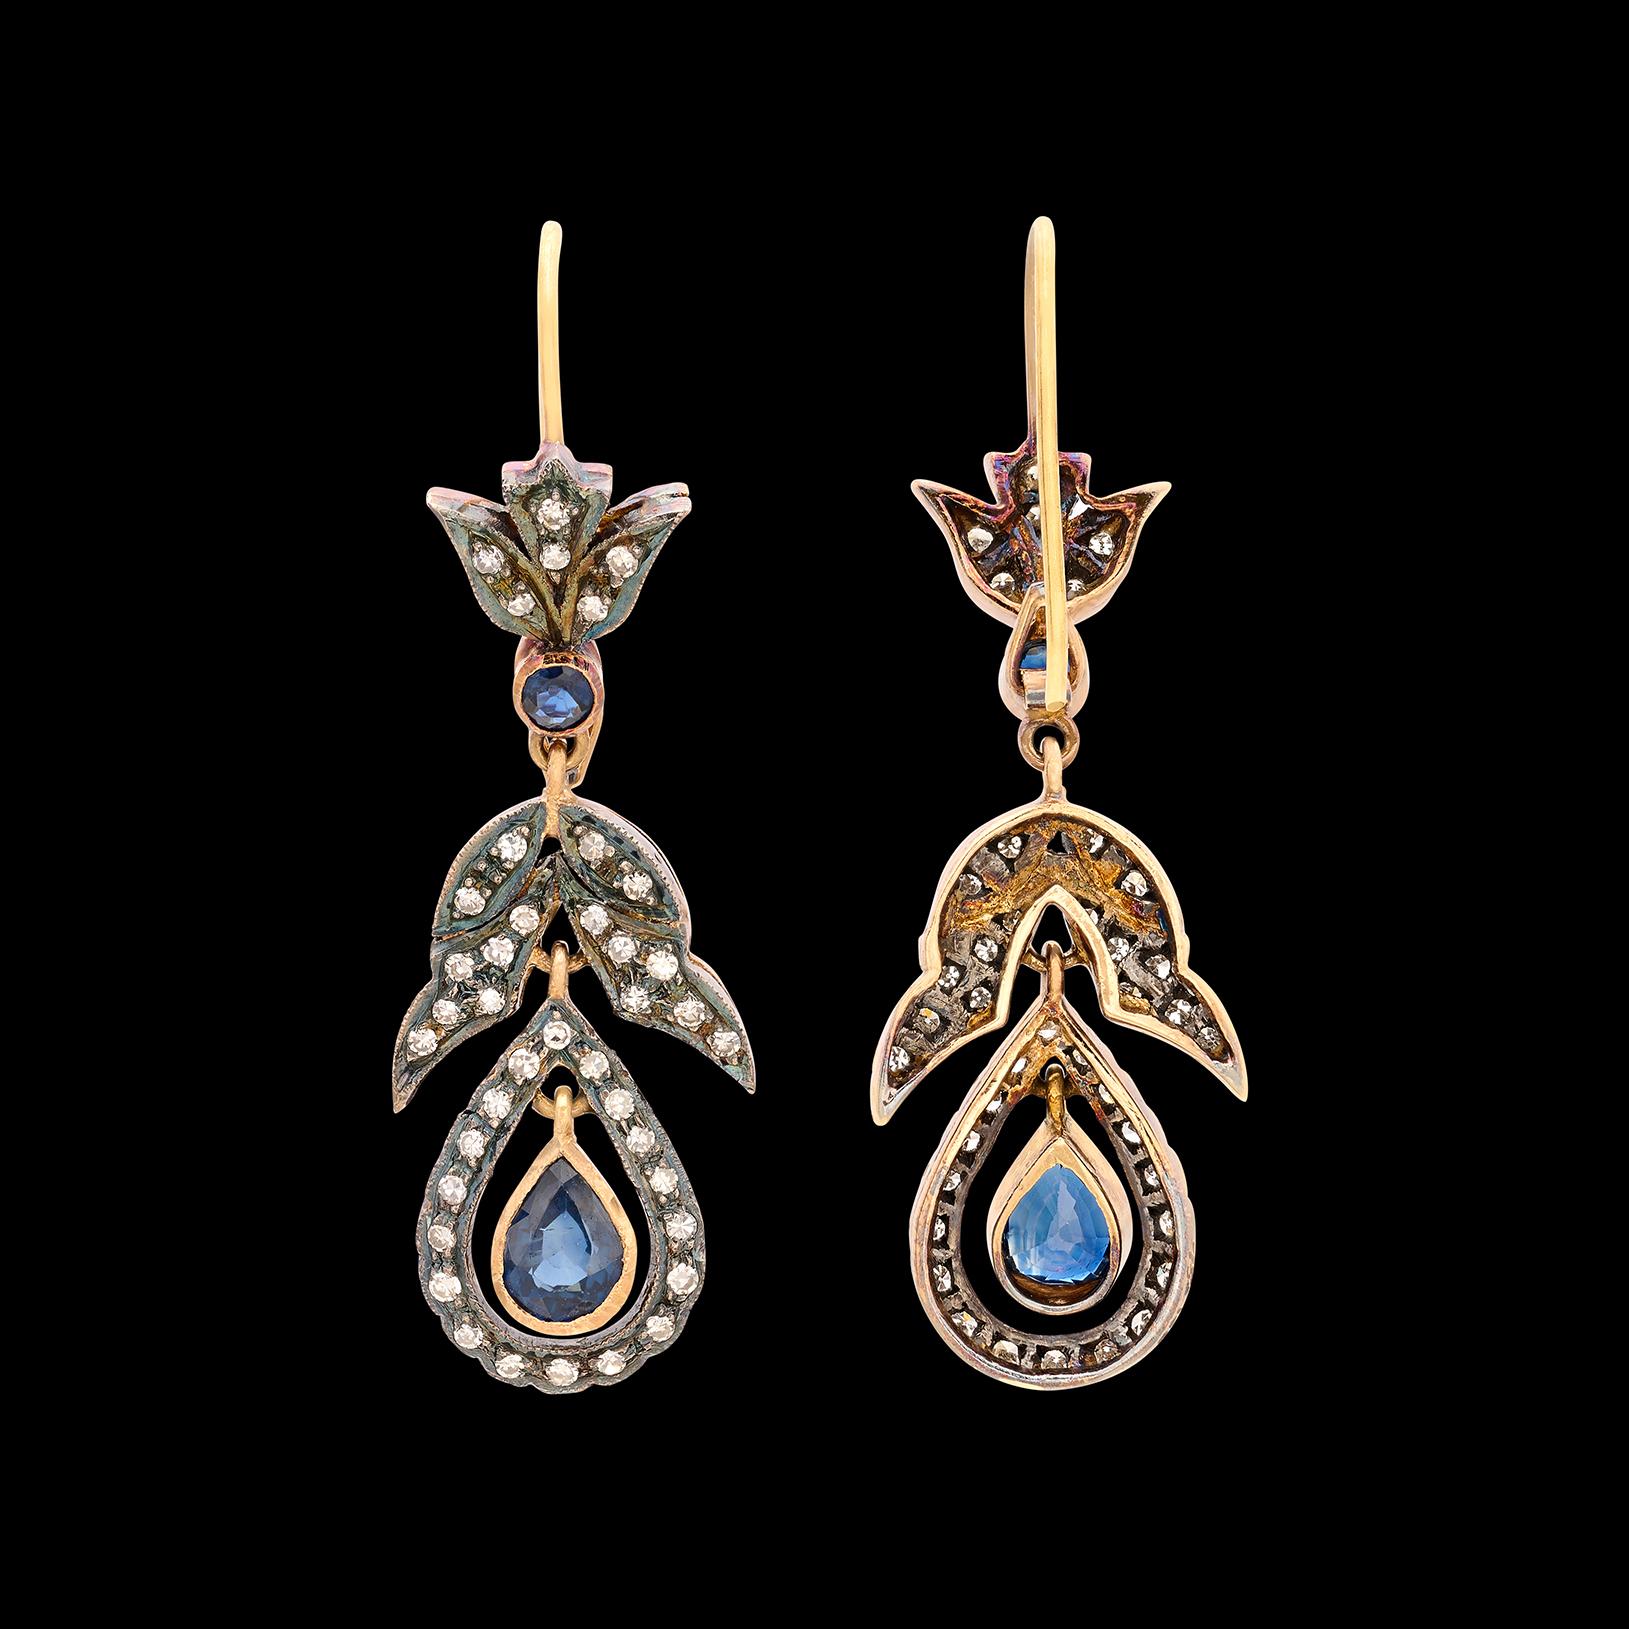 These elegant silver-topped 18k gold drop earrings bring the past to the present. With 2.20 carats of bezel-set round and pear-shaped sapphires, brought to life with 80 single-cut diamonds weighing 0.60ct., the pendant earrings weigh 7.2 grams and